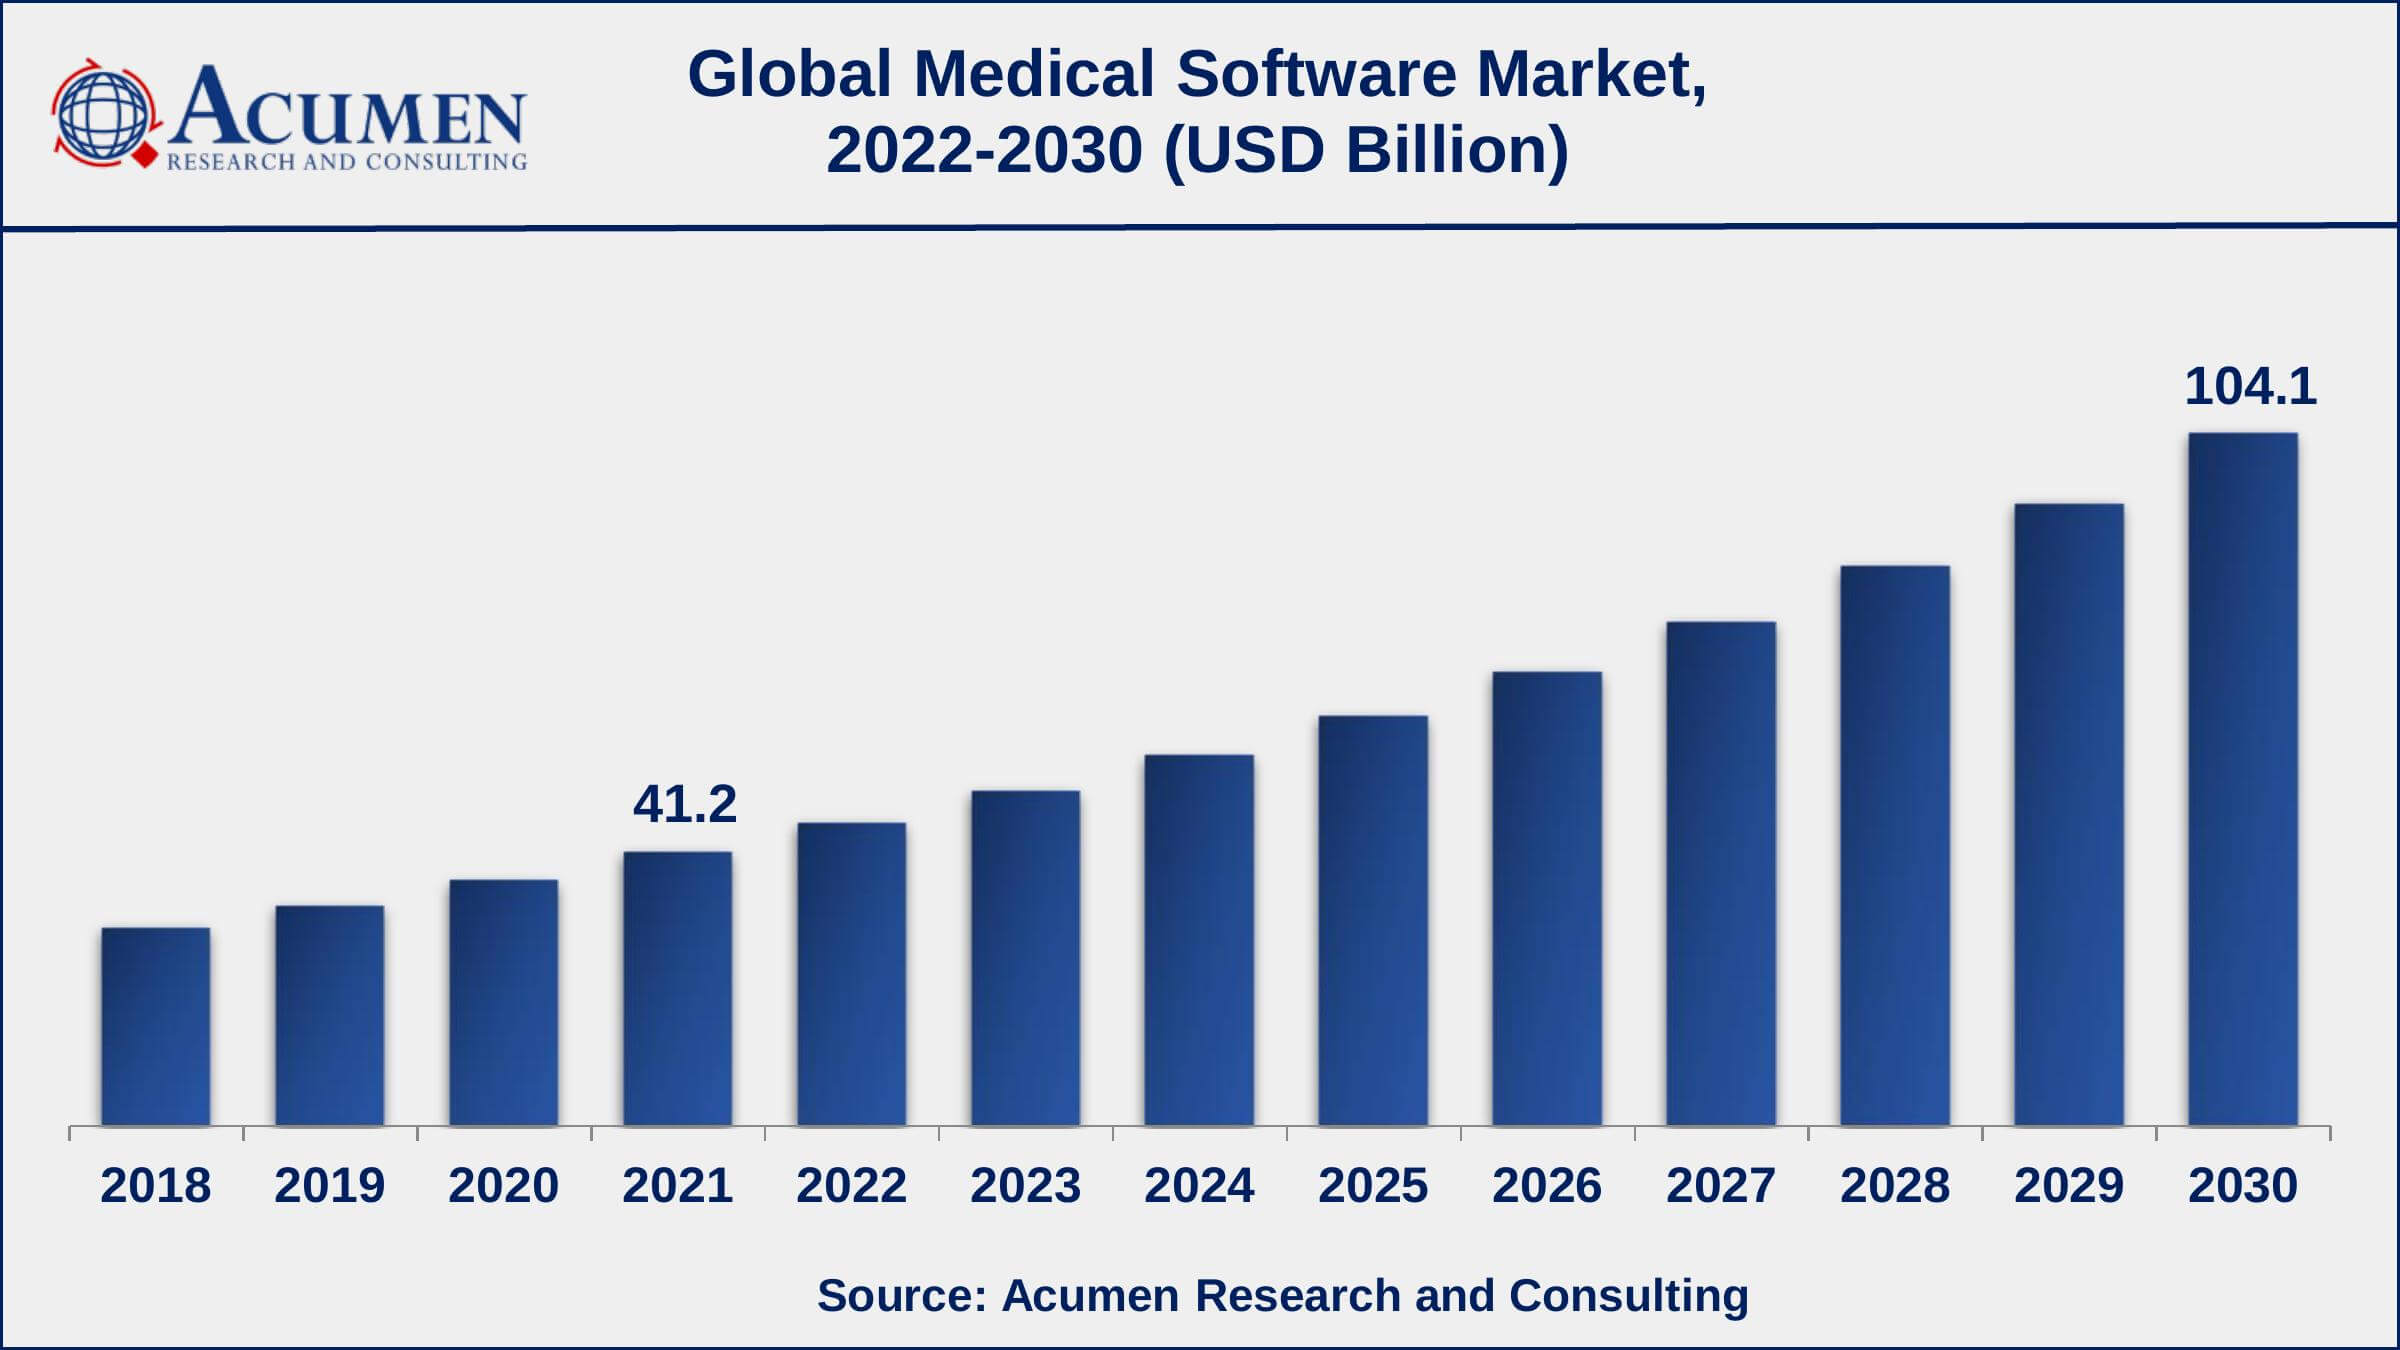 Asia-Pacific medical software market growth will record a CAGR of more than 11% from 2022 to 2030